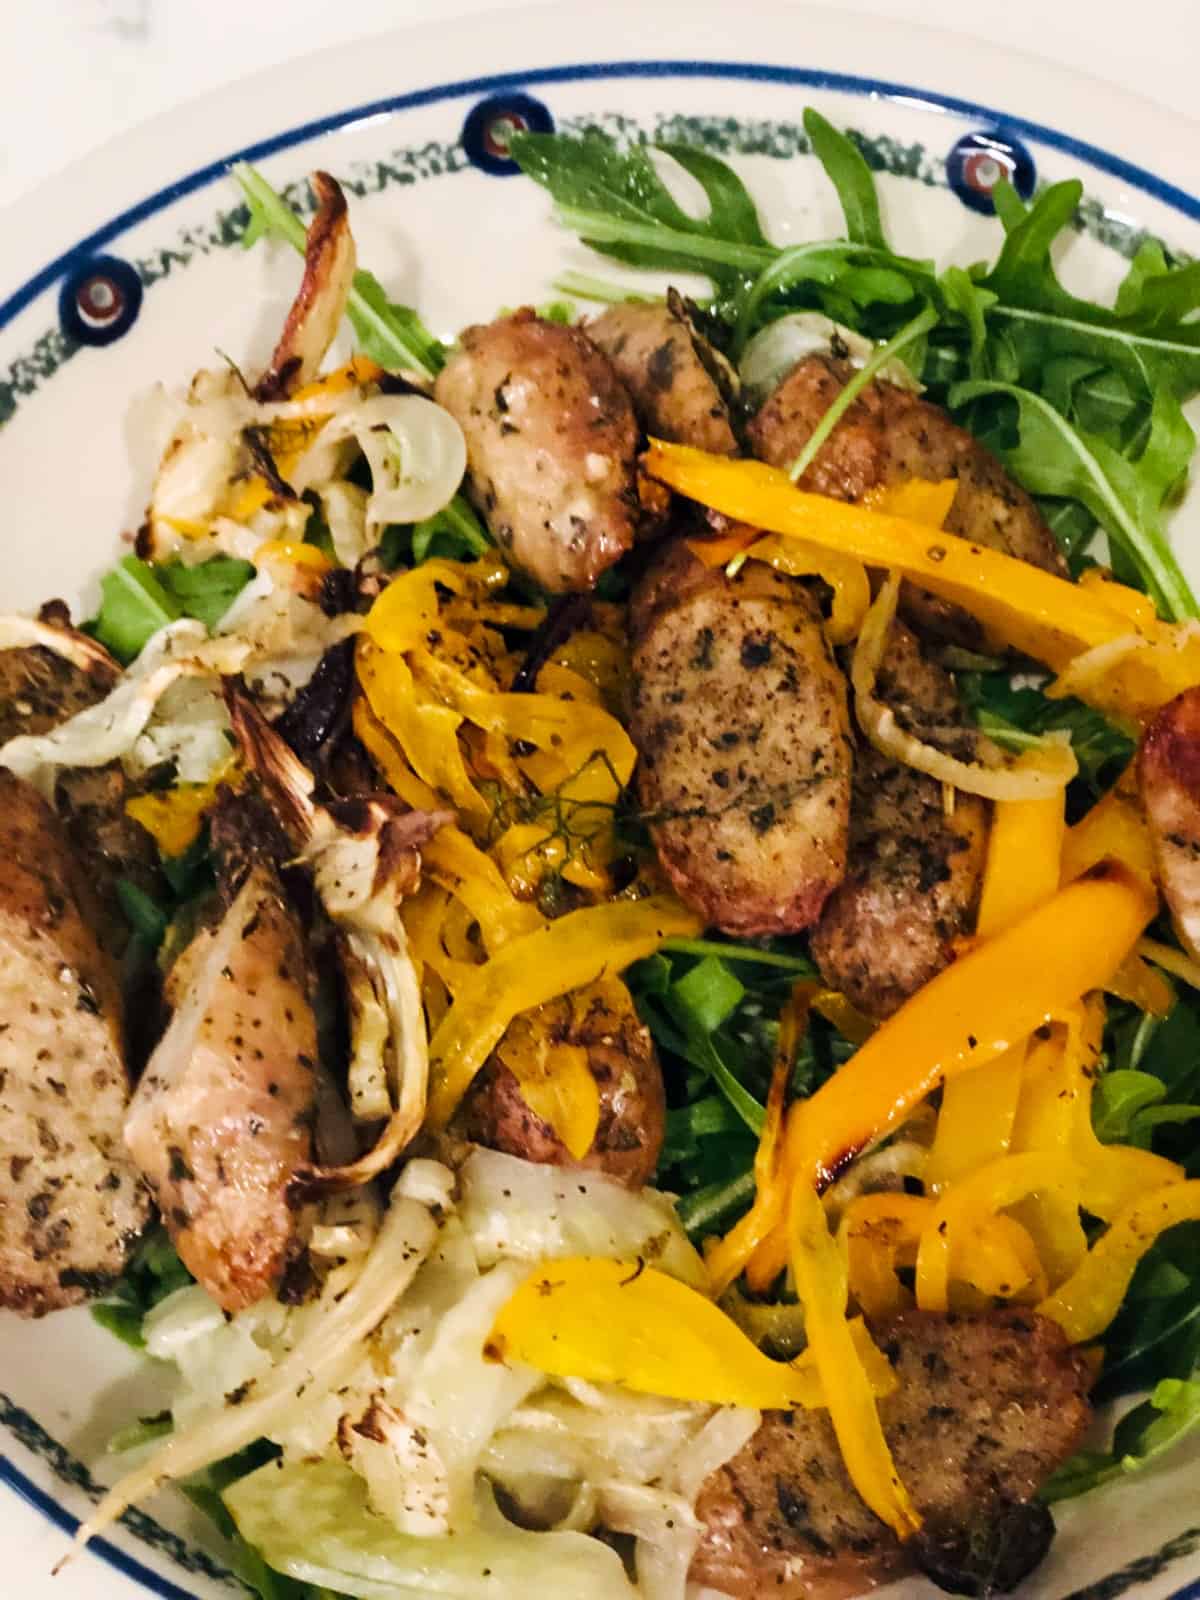 Fennel, sausage and peppers on arugula in white bowl.